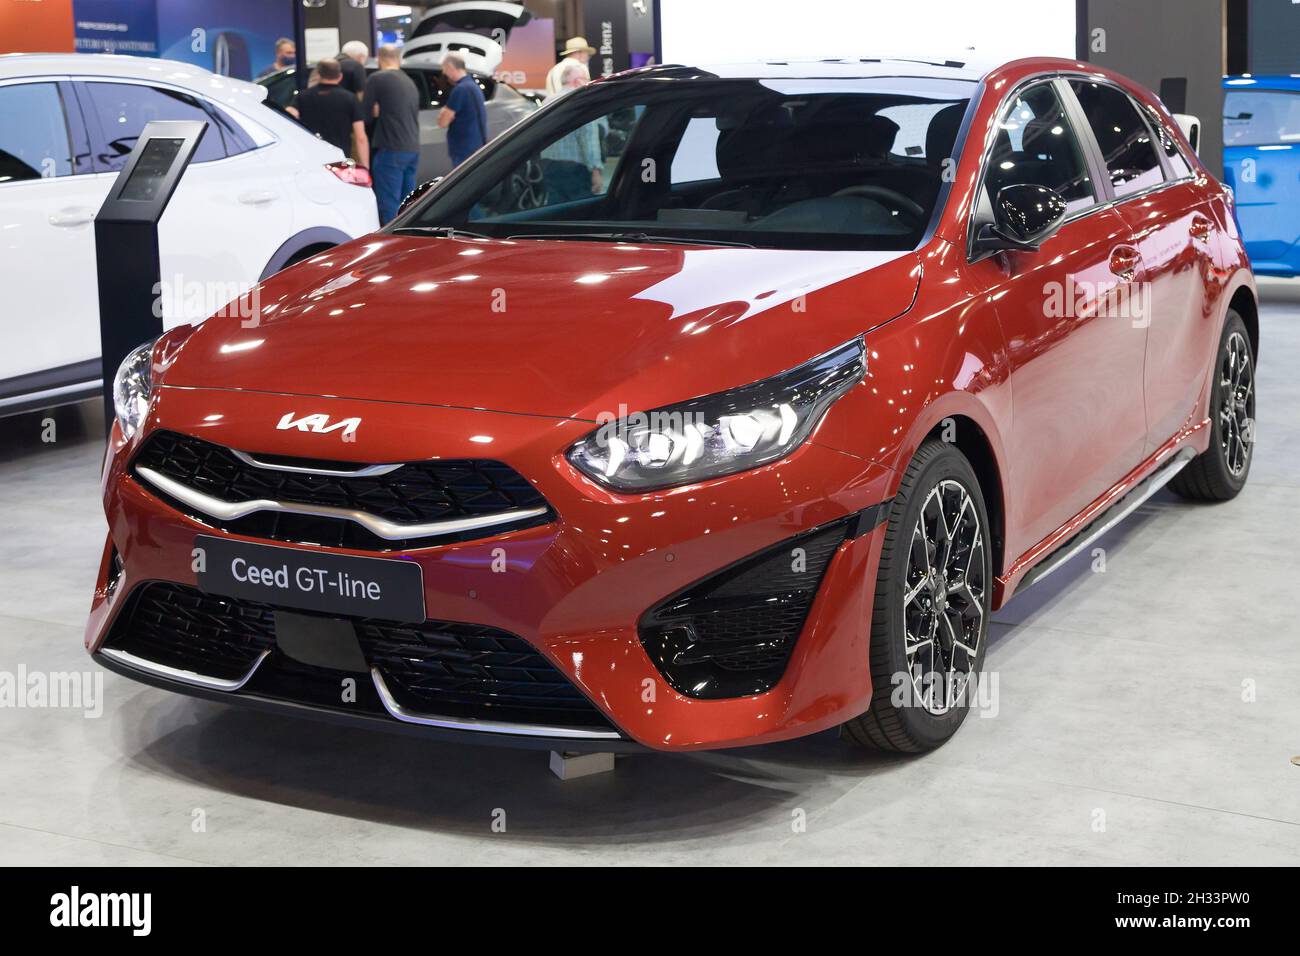 https://c8.alamy.com/comp/2H33PW0/barcelona-spain-october-7-2021-kia-ceed-15-mhev-gt-line-dct-showcased-at-automobile-barcelona-2021-in-barcelona-spain-2H33PW0.jpg